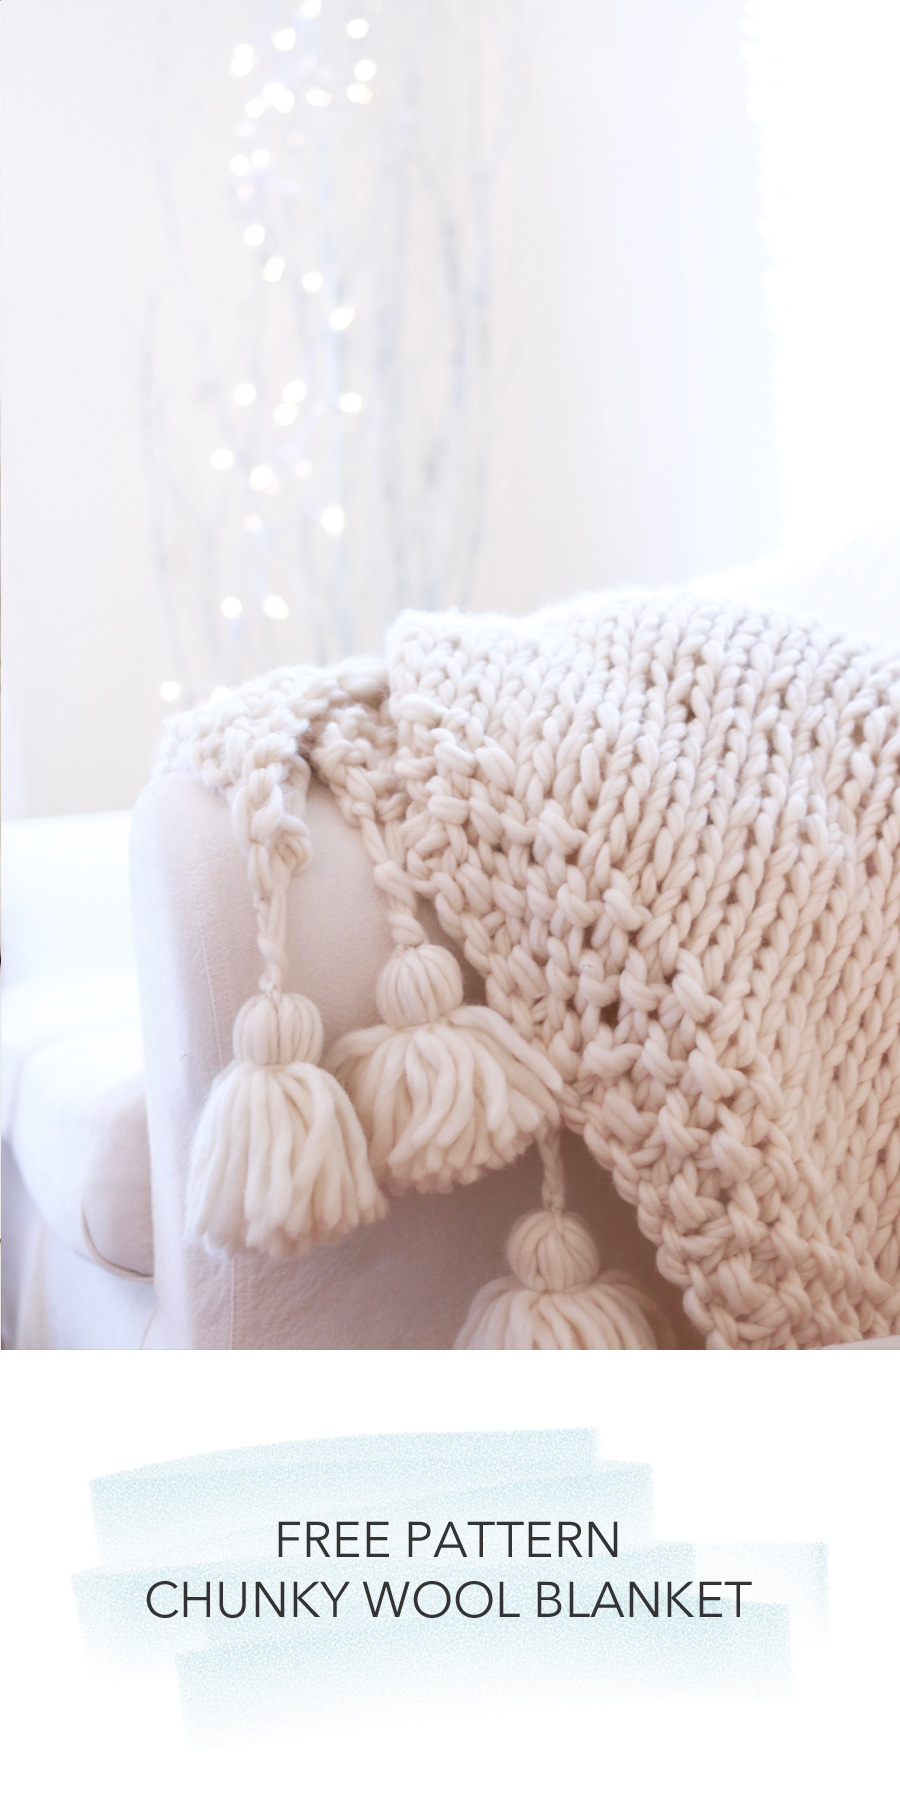 How to make a chunky wool blanket ! A beautiful free pattern !